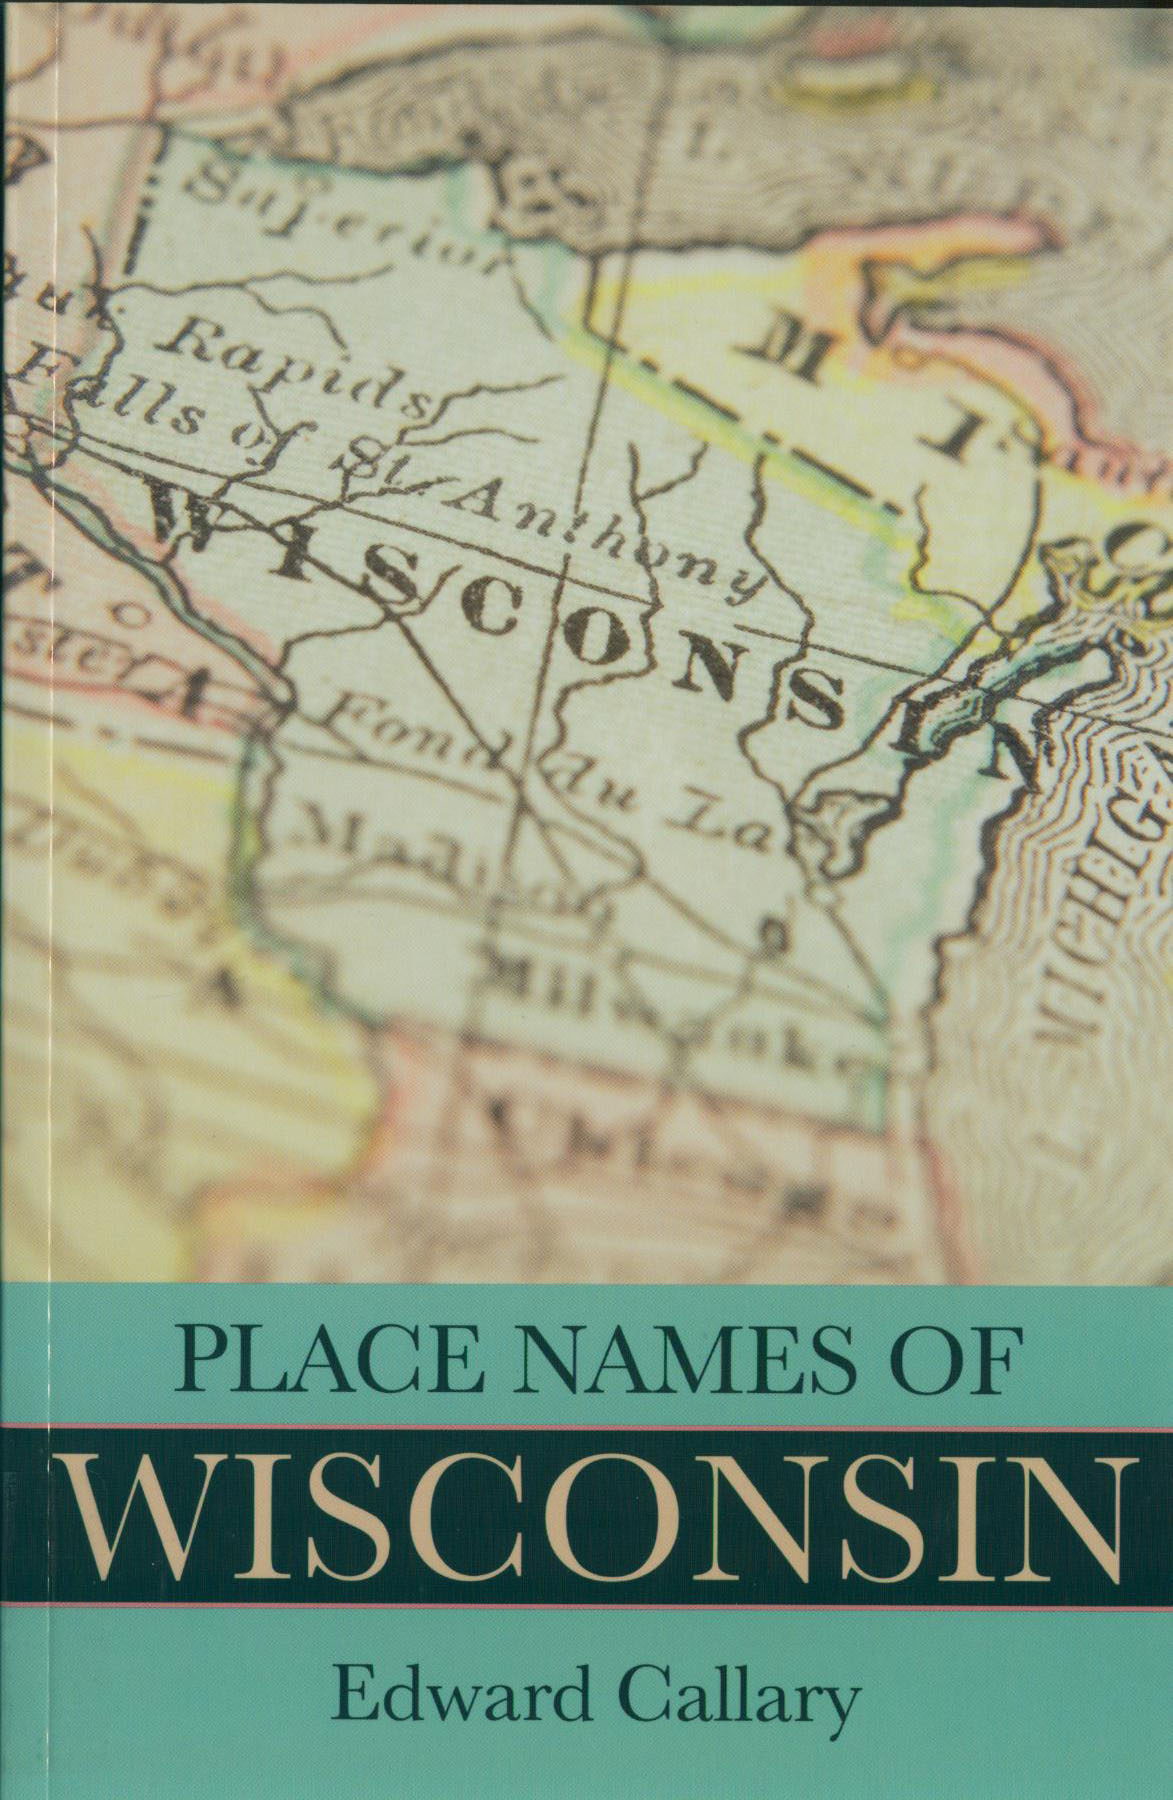 Place Names of Wisconsin book jacket